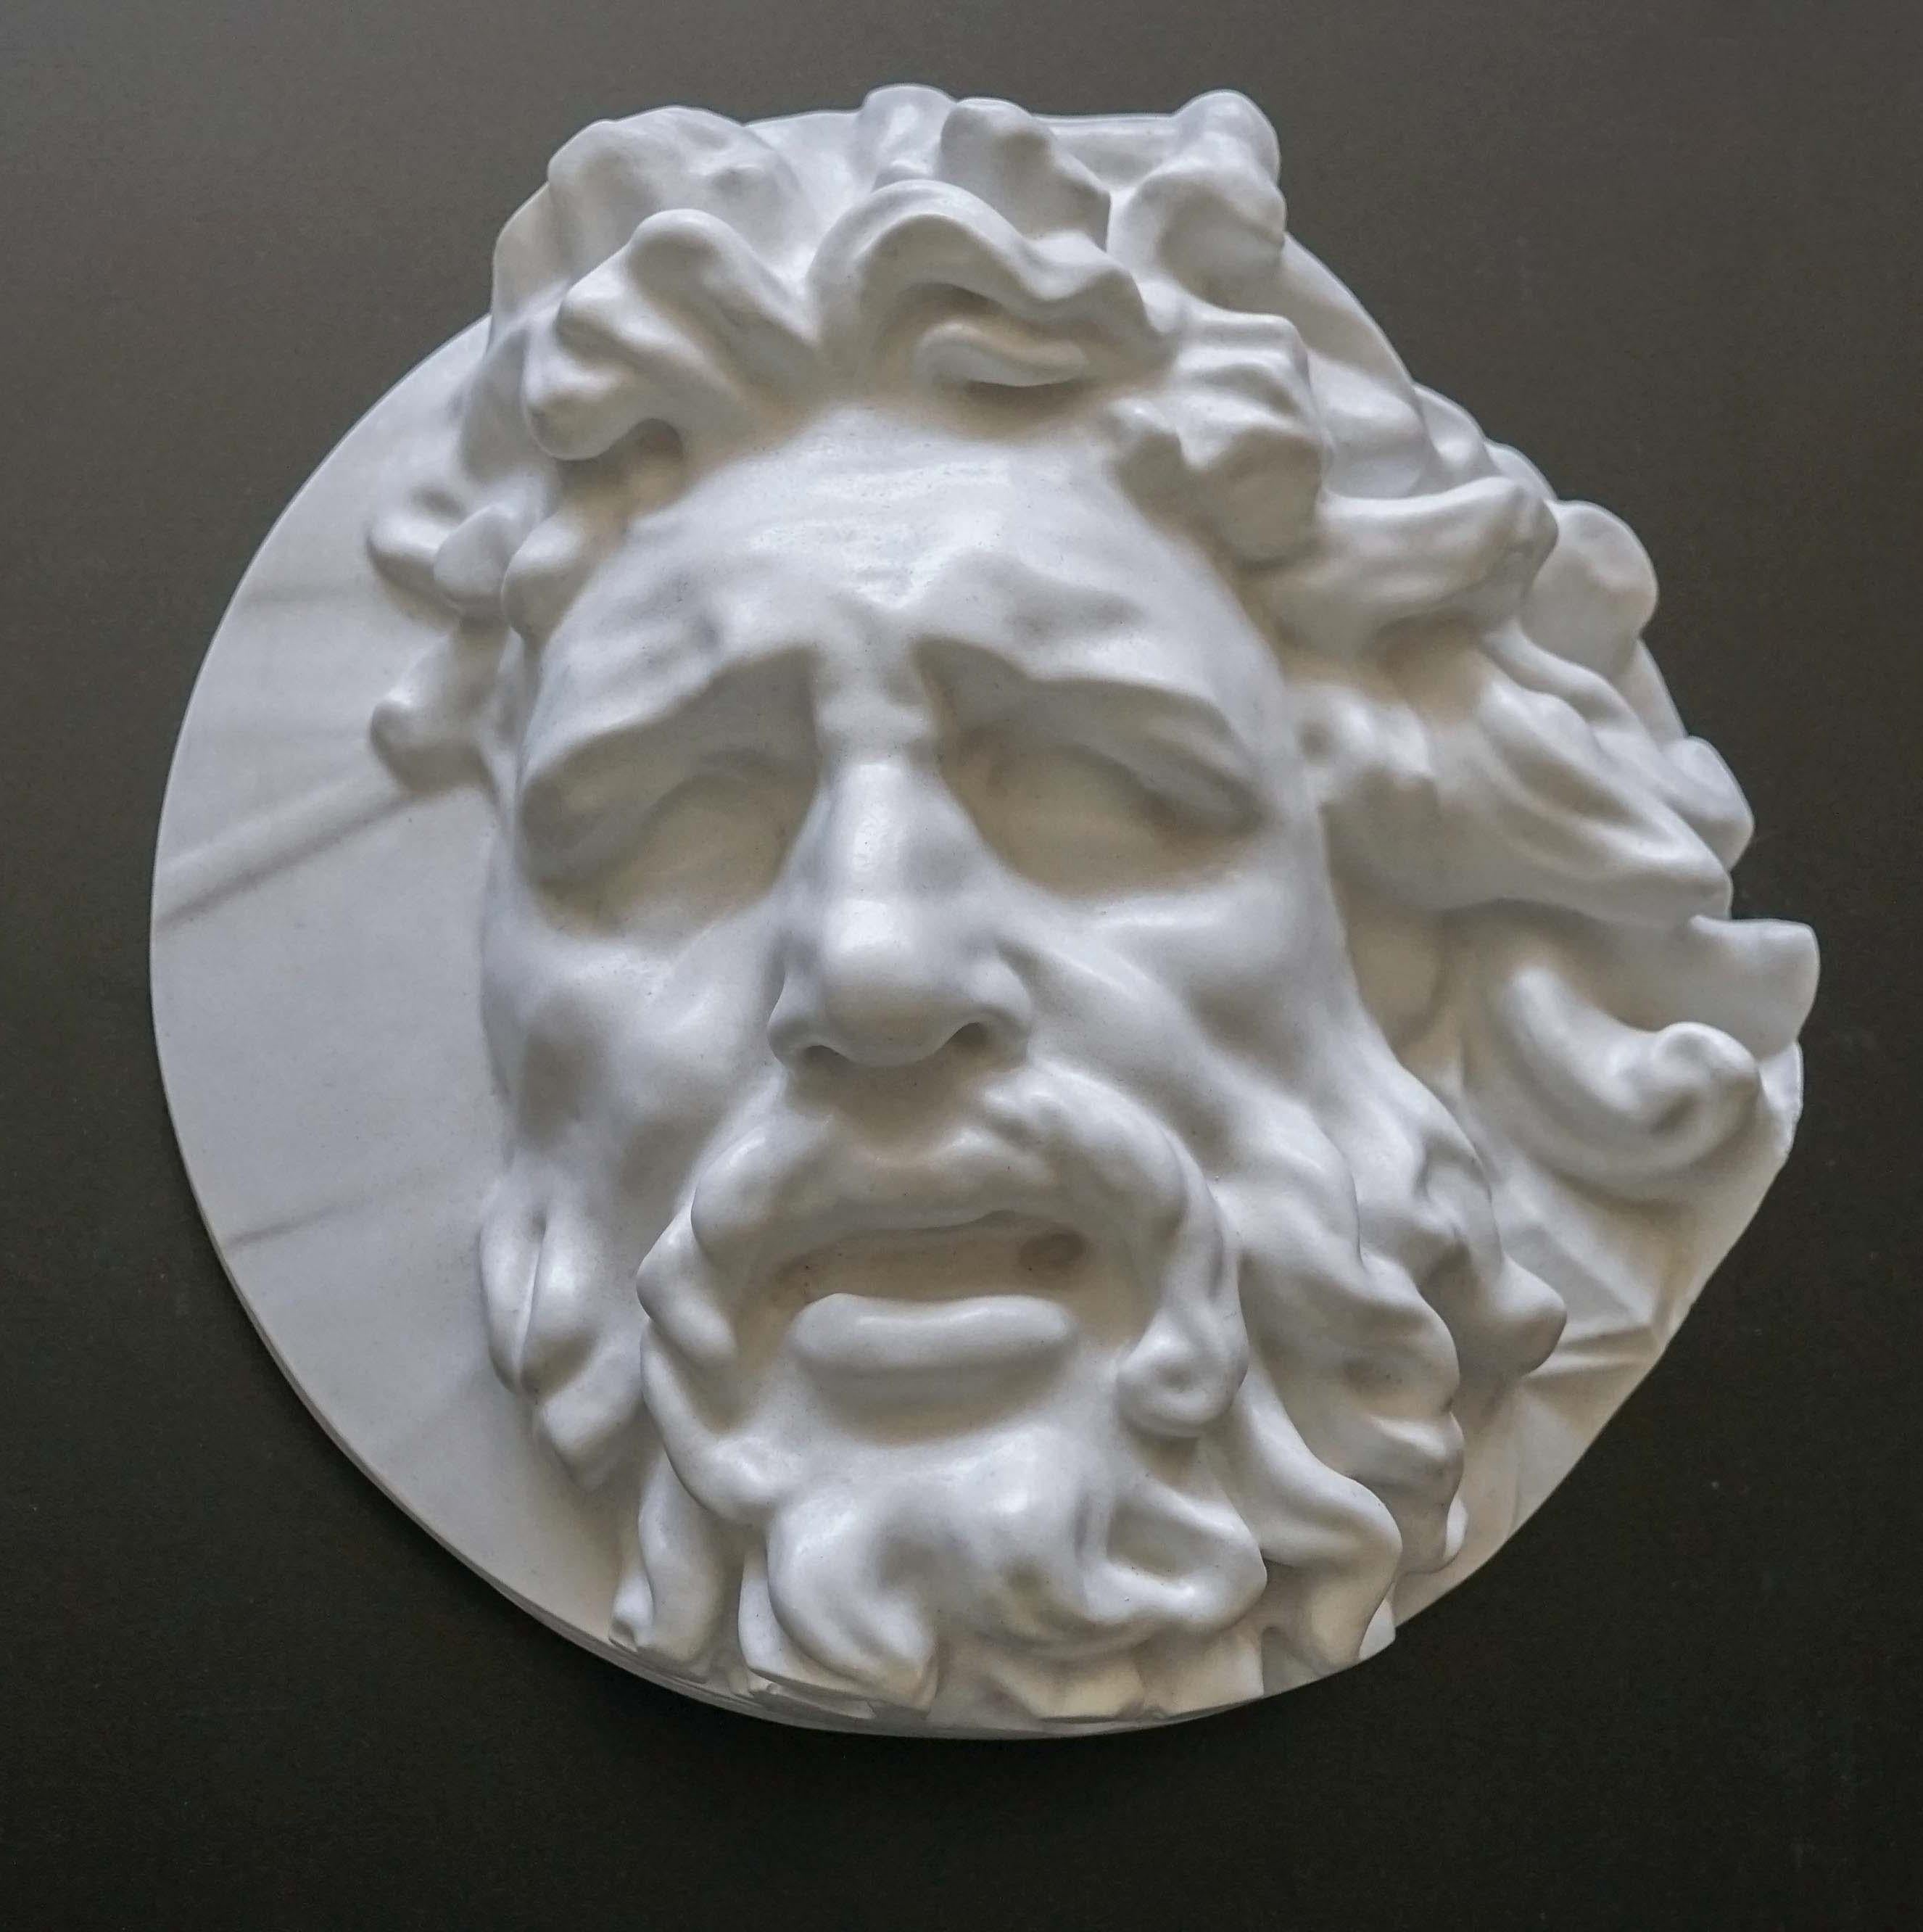 From extremely detailed 3D scans of the most important classical sculptures of all times, Eduard Locota has digitally sliced and extracted the essential portion of the artwork, then physically 3D-printed it into a new representation fit for the